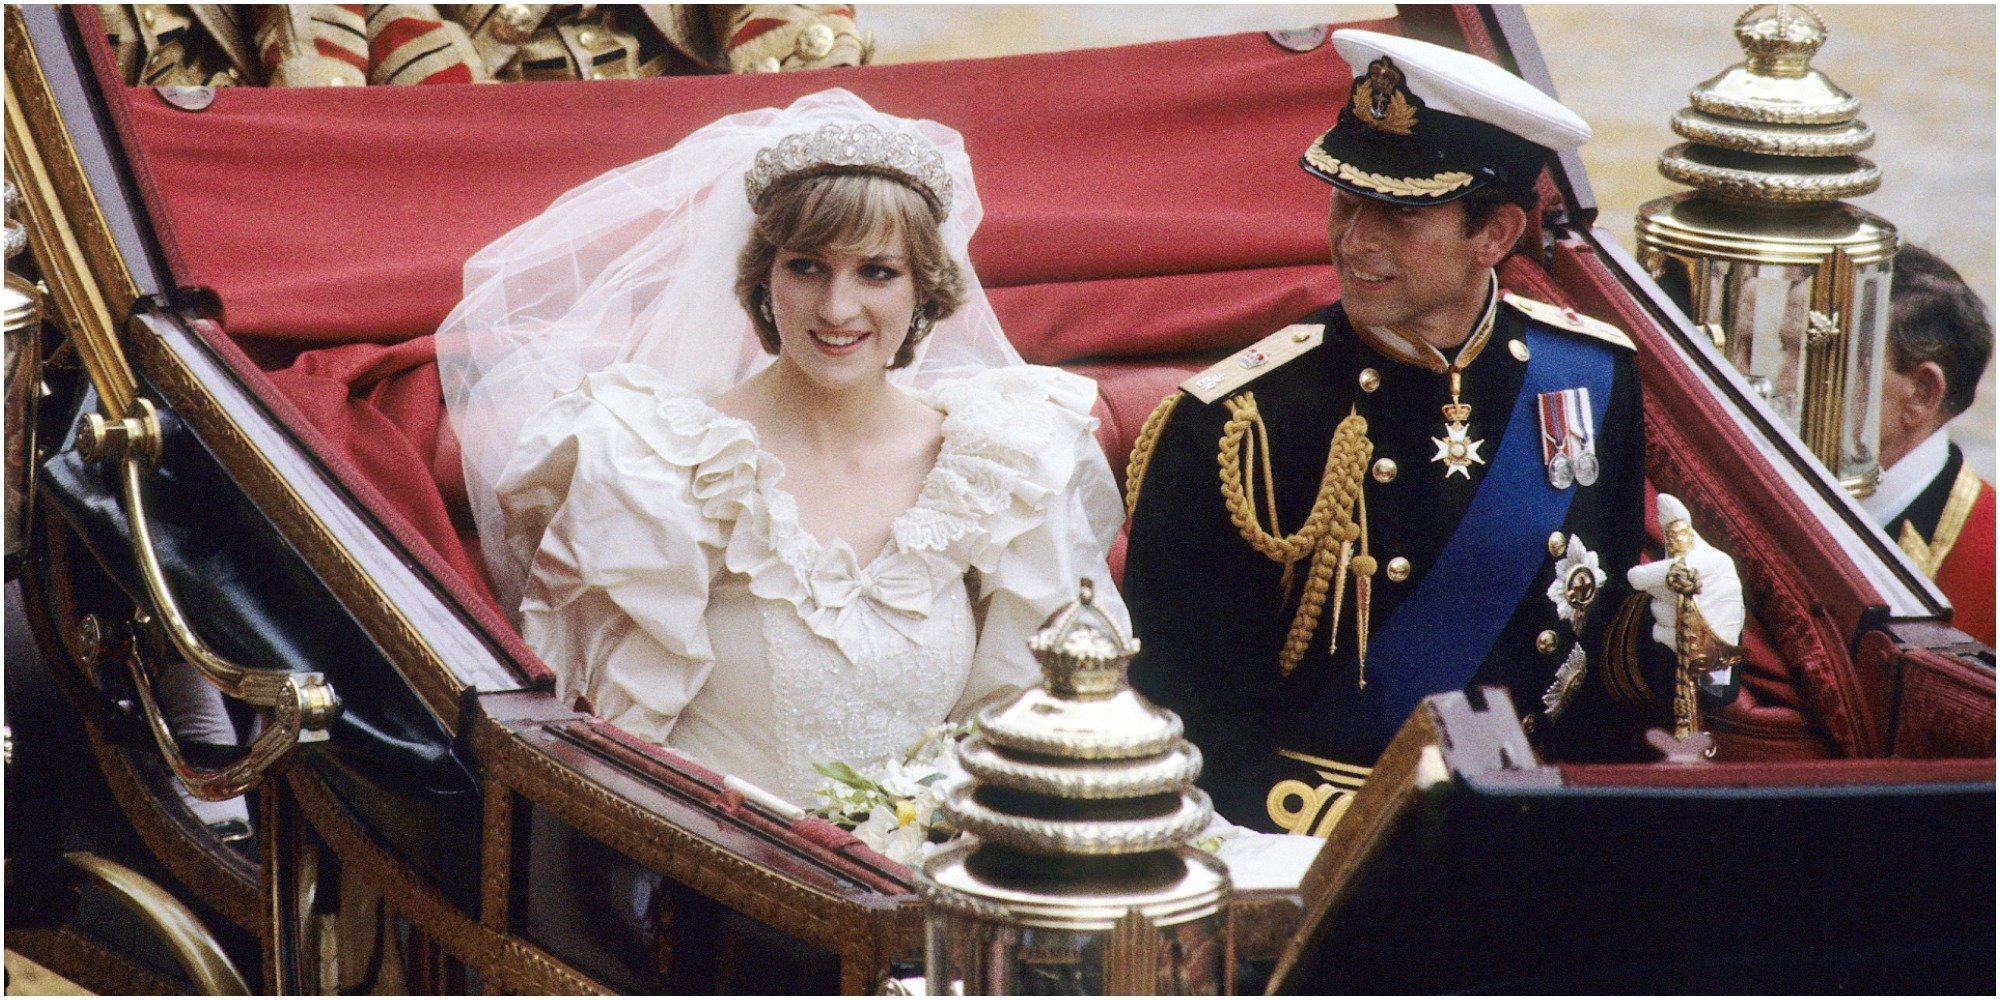 Princess Diana and Prince Charles in the royal coach on their 1981 wedding day.